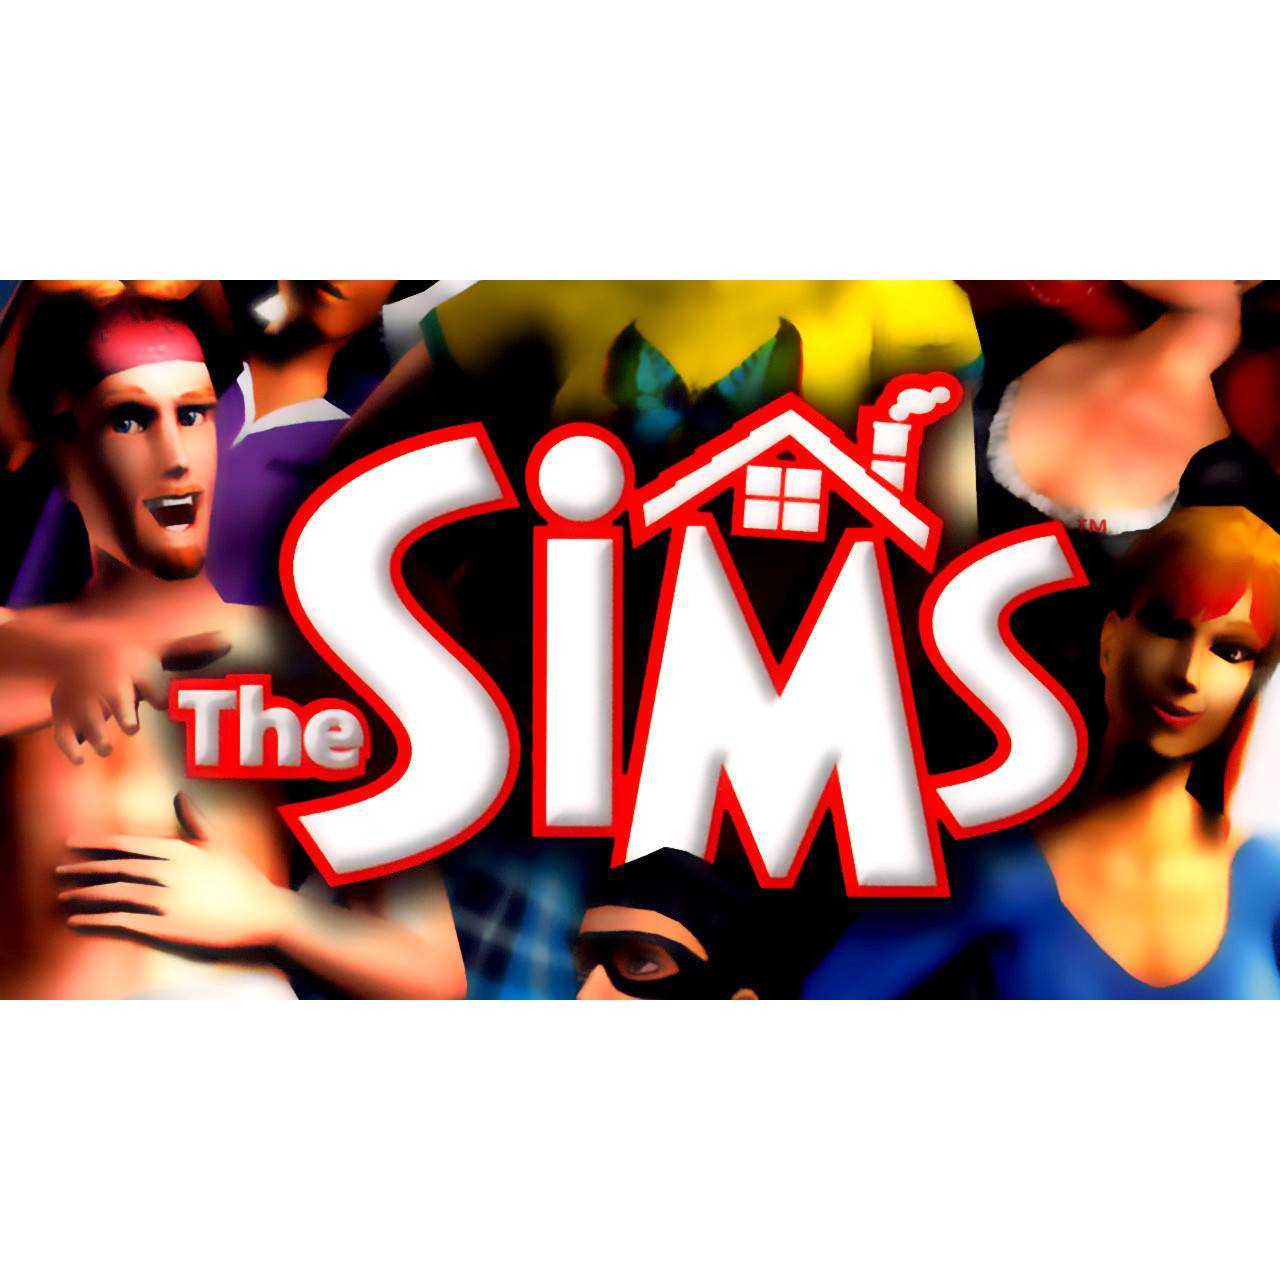 The Sims Sony PlayStation 2 Game